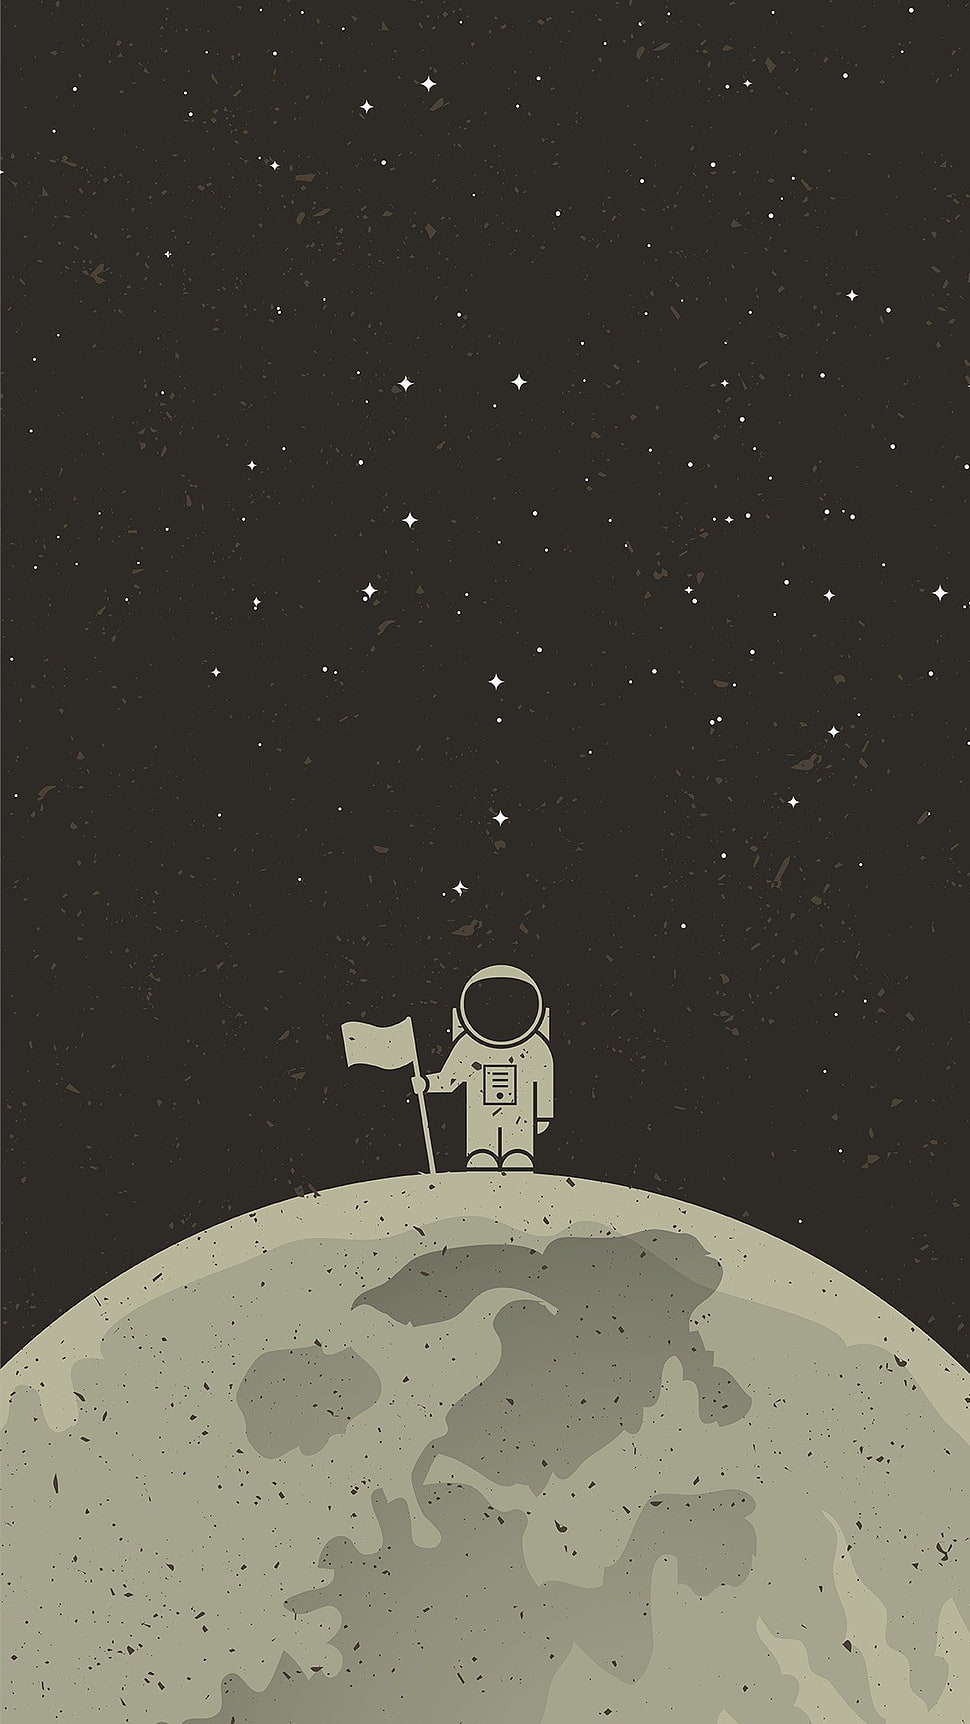 person in space suit standing holding flag on moon illustration HD wallpaper